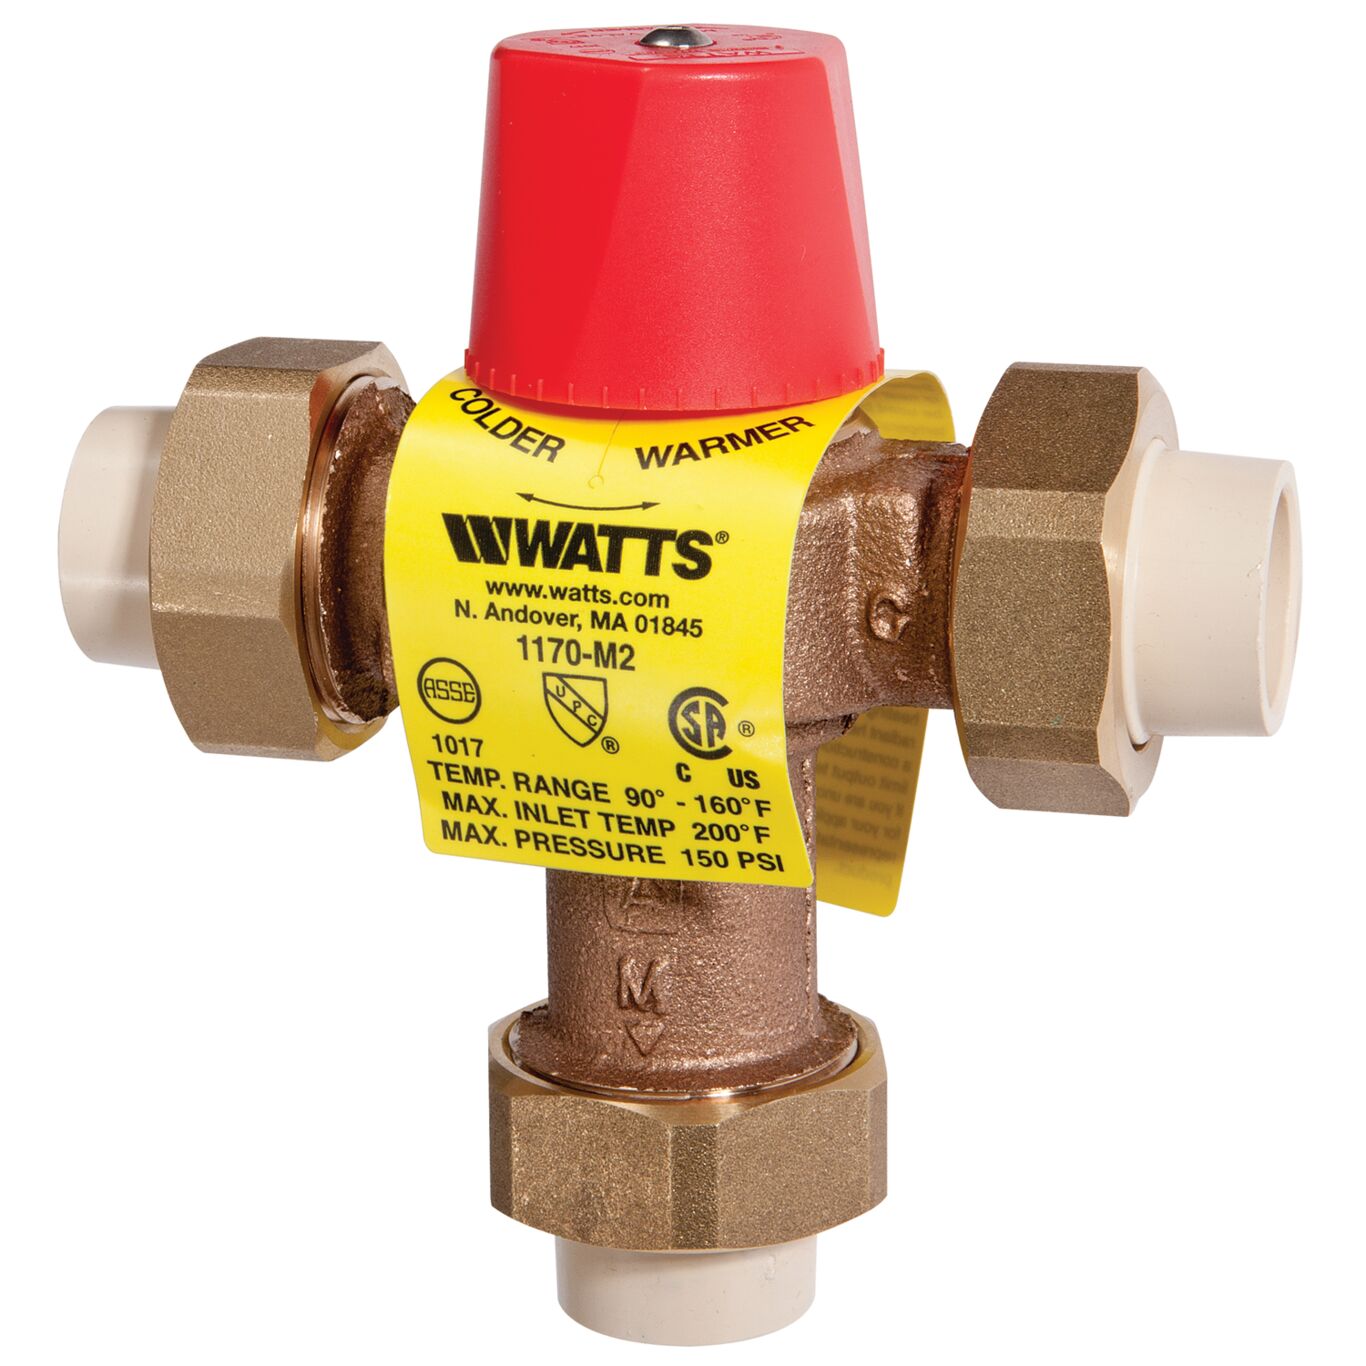 WATTS LF1170-M2-US Thermostatic Mixing Valve,1 in. 